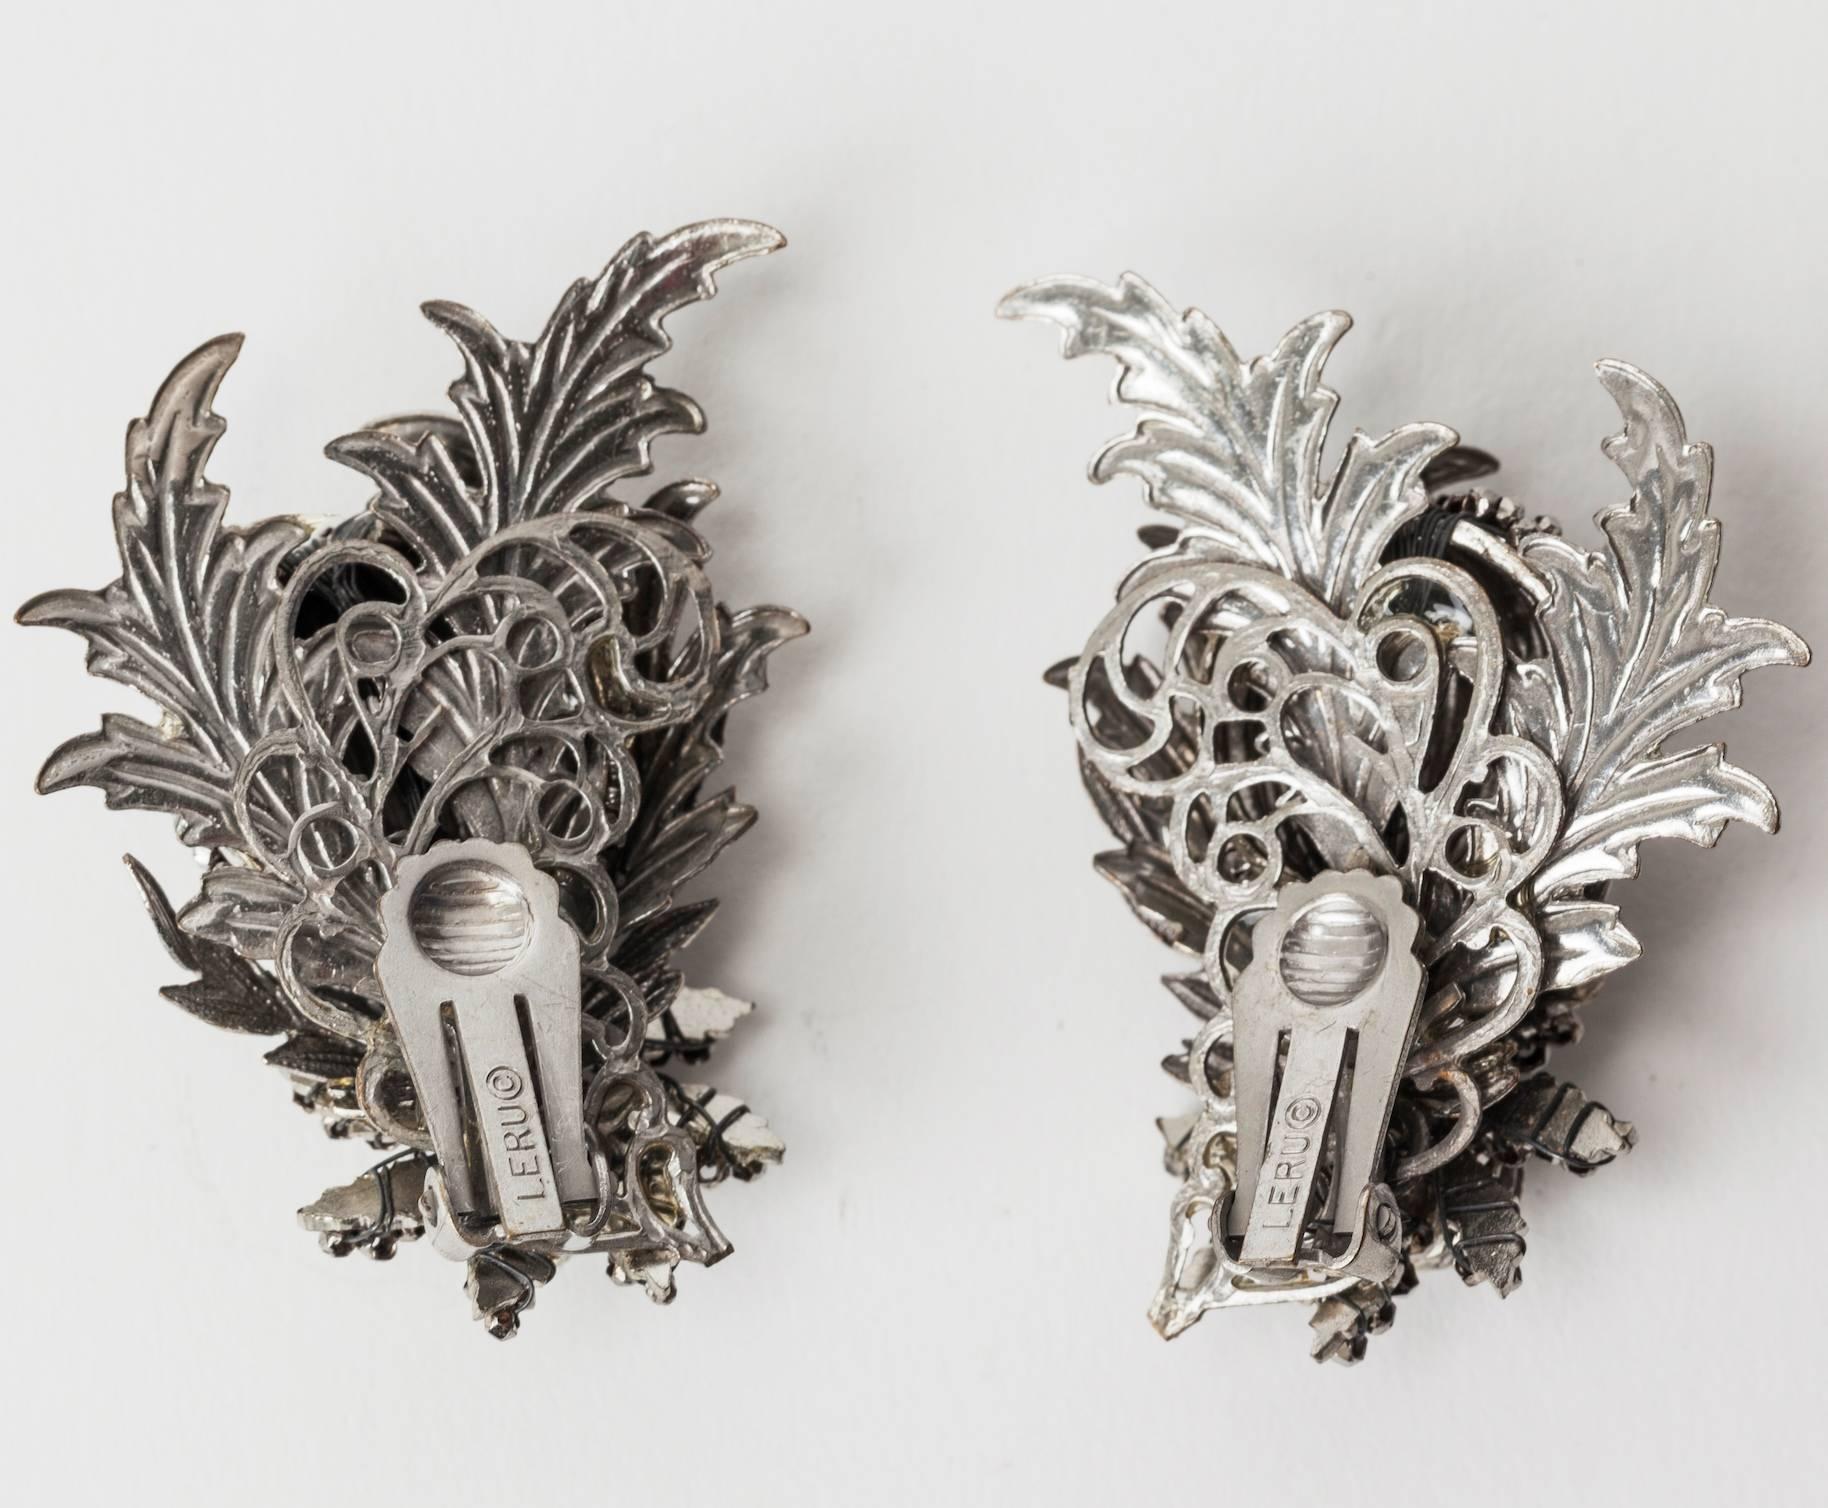 Elaborate and dimensional, woven cut steel beaded earrings with clip back fittings by Leru from the 1950's. Very similar in construction to Miriam Haskell pieces. Berry and floral motifs with super hand sewn detailing throughout.
Excellent